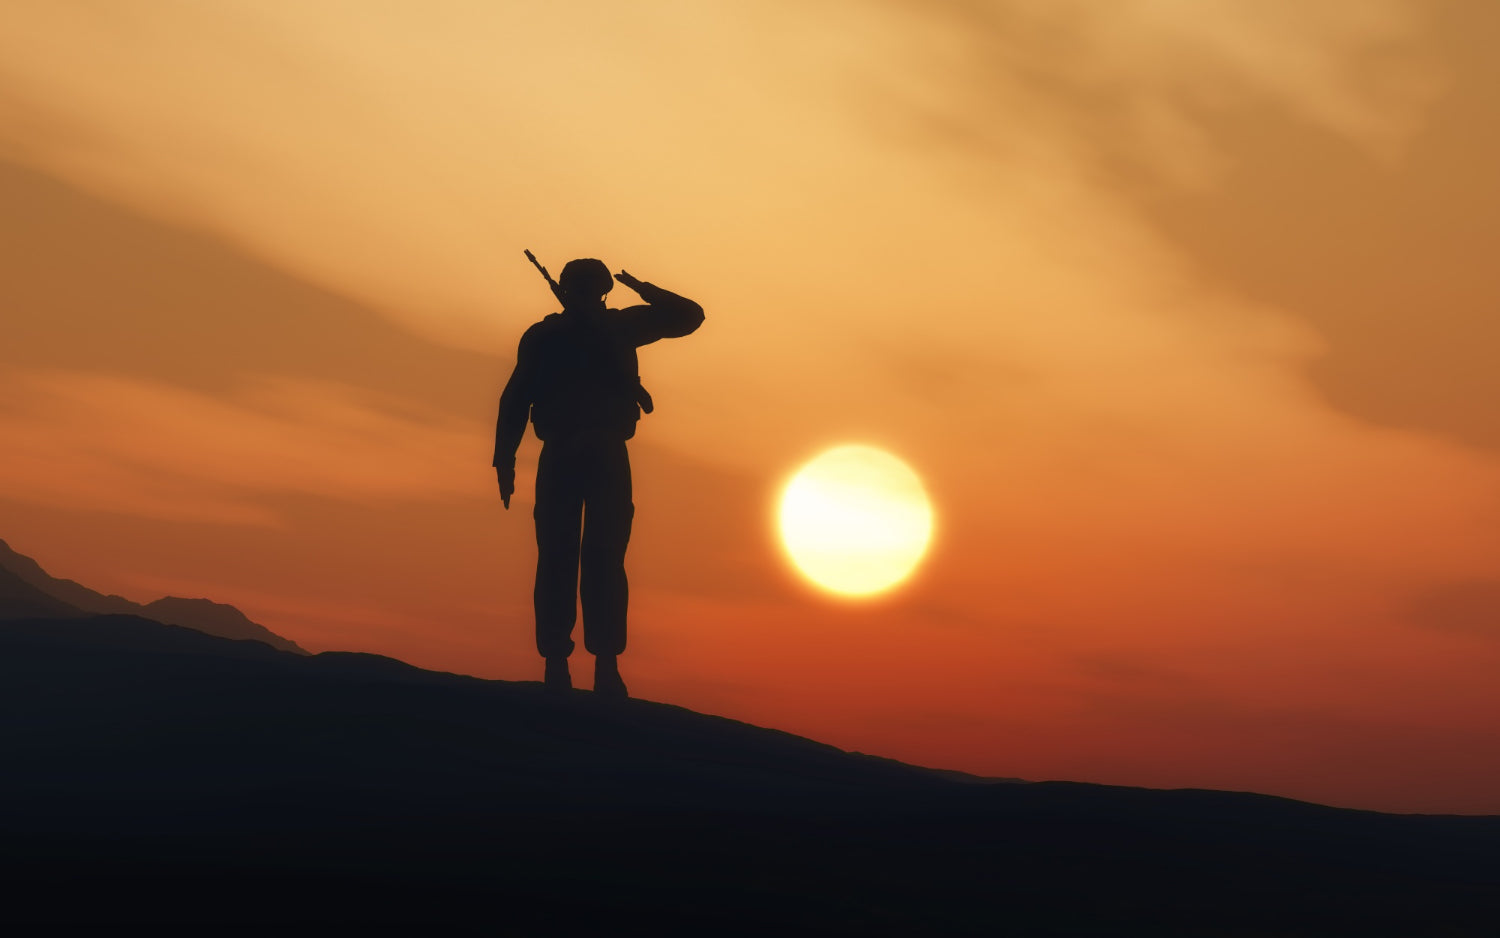 A soldier saluting in front of a sun